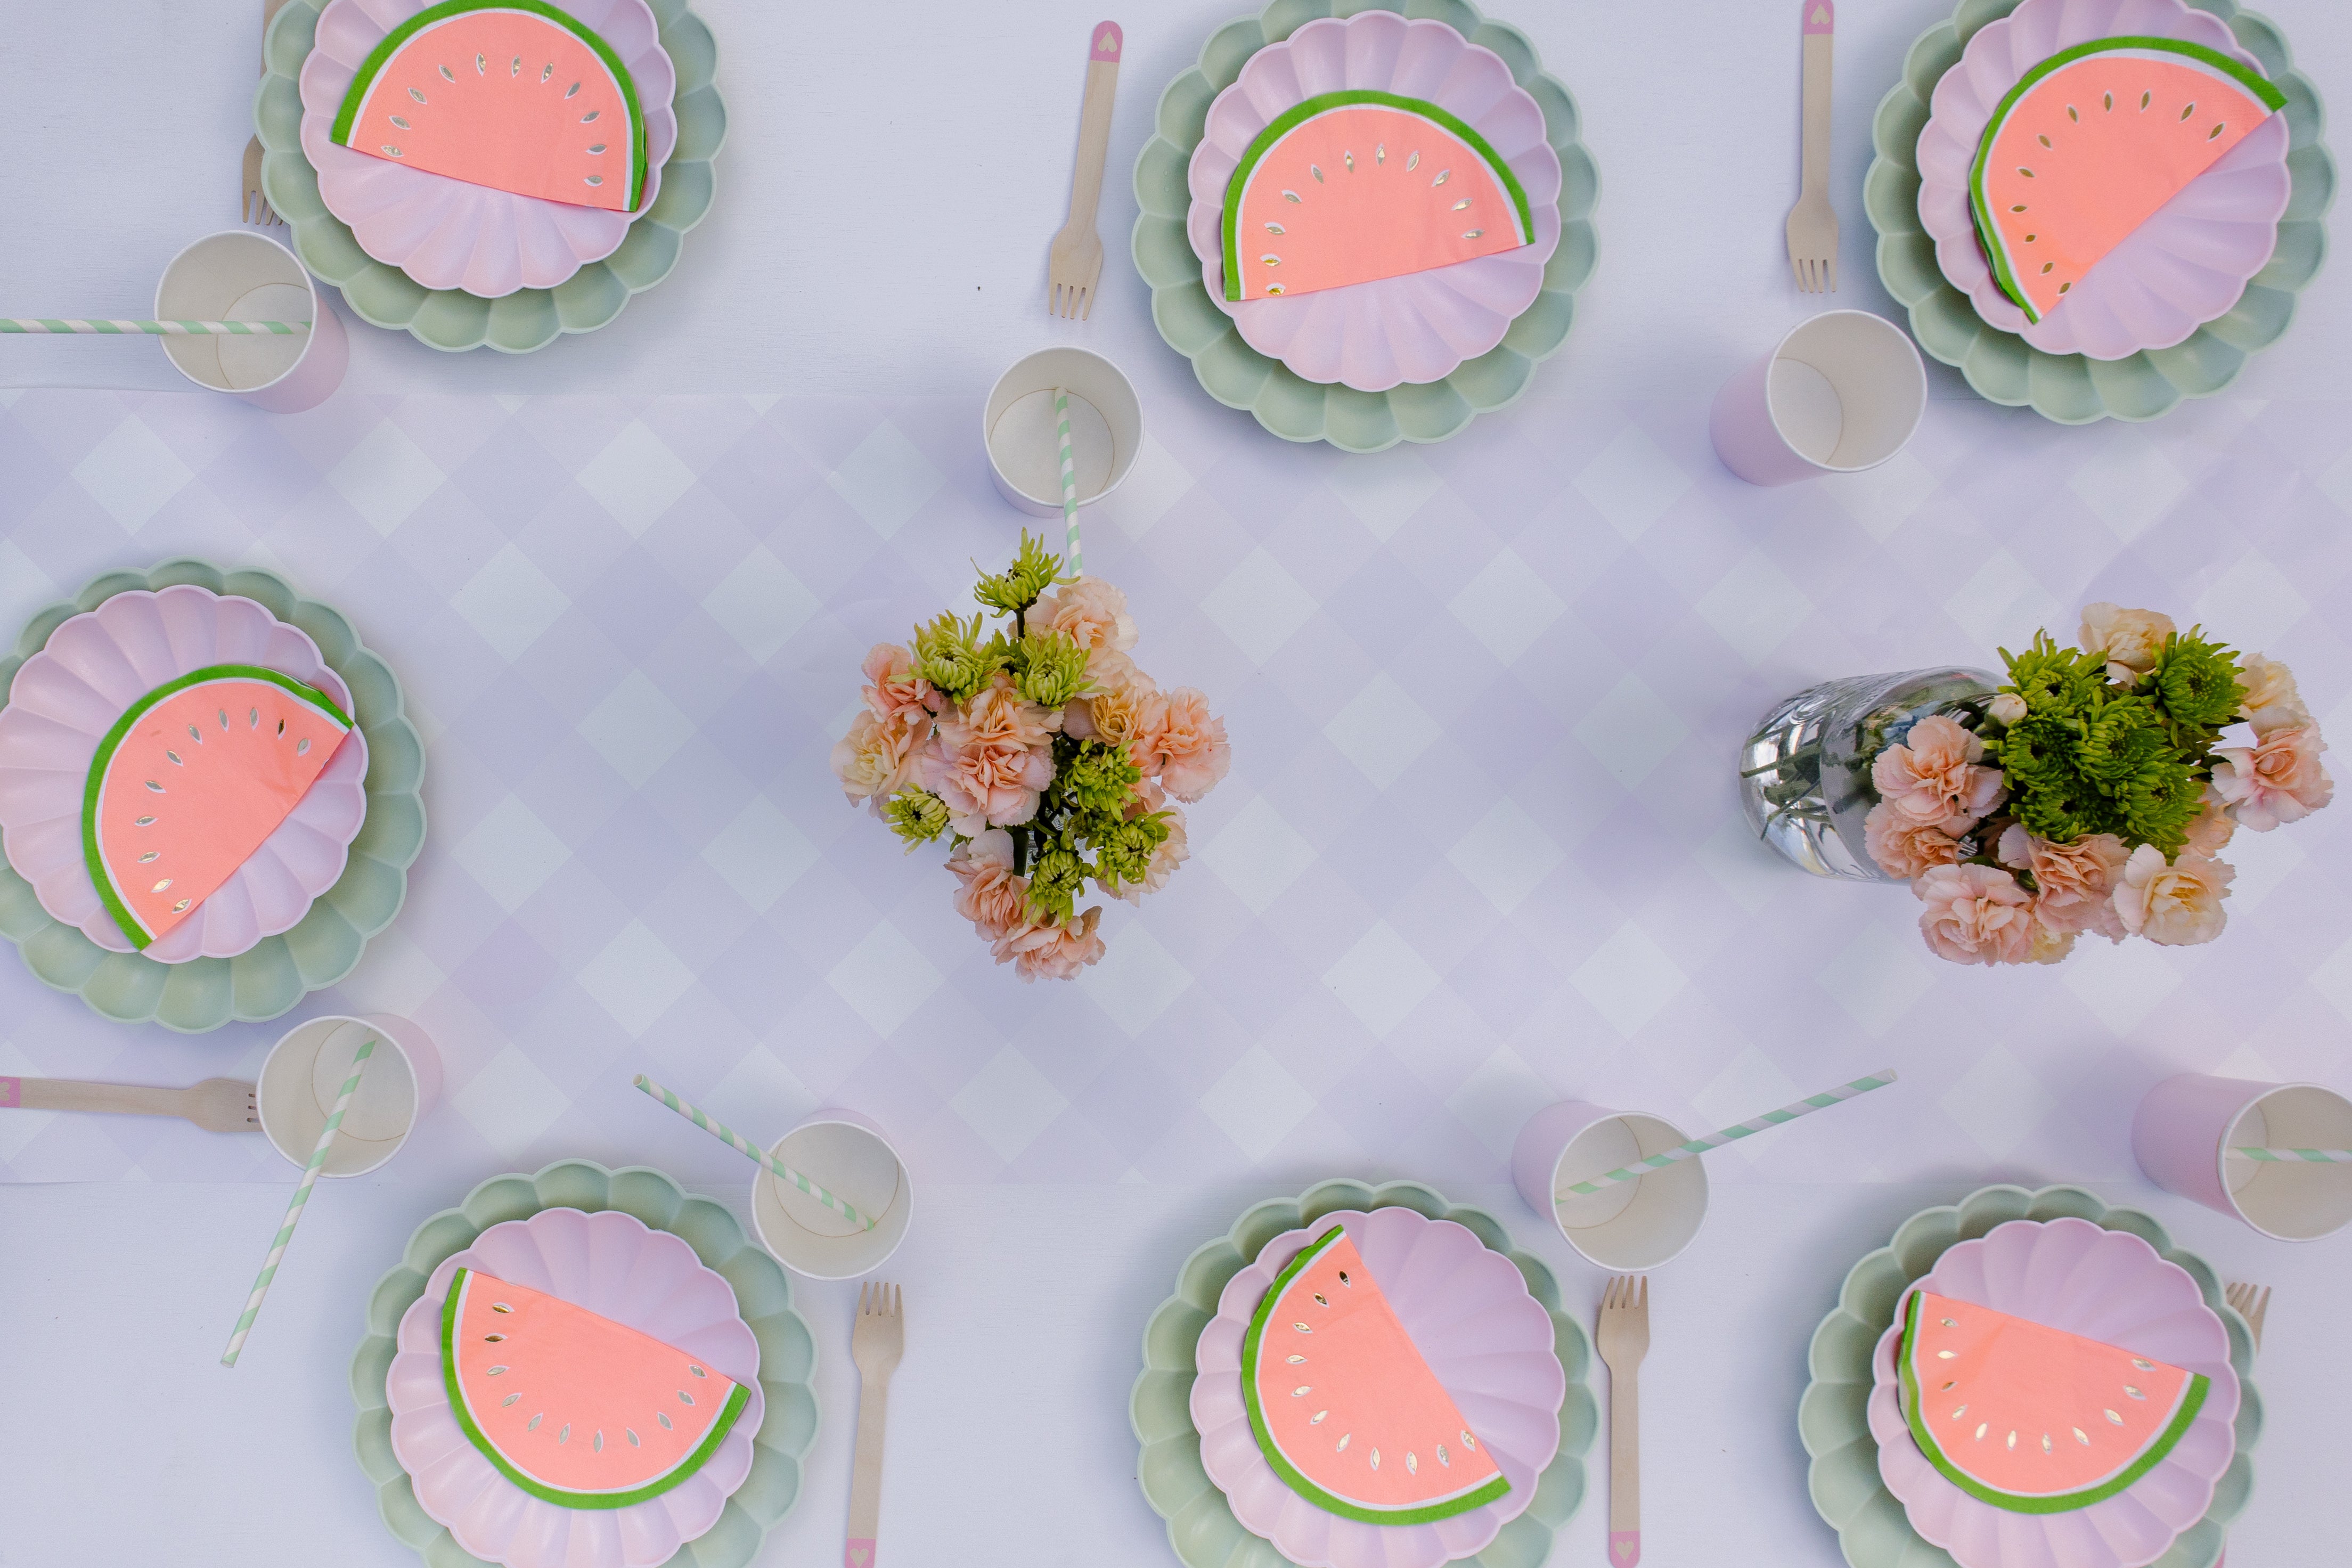 watermelon table setting for kids